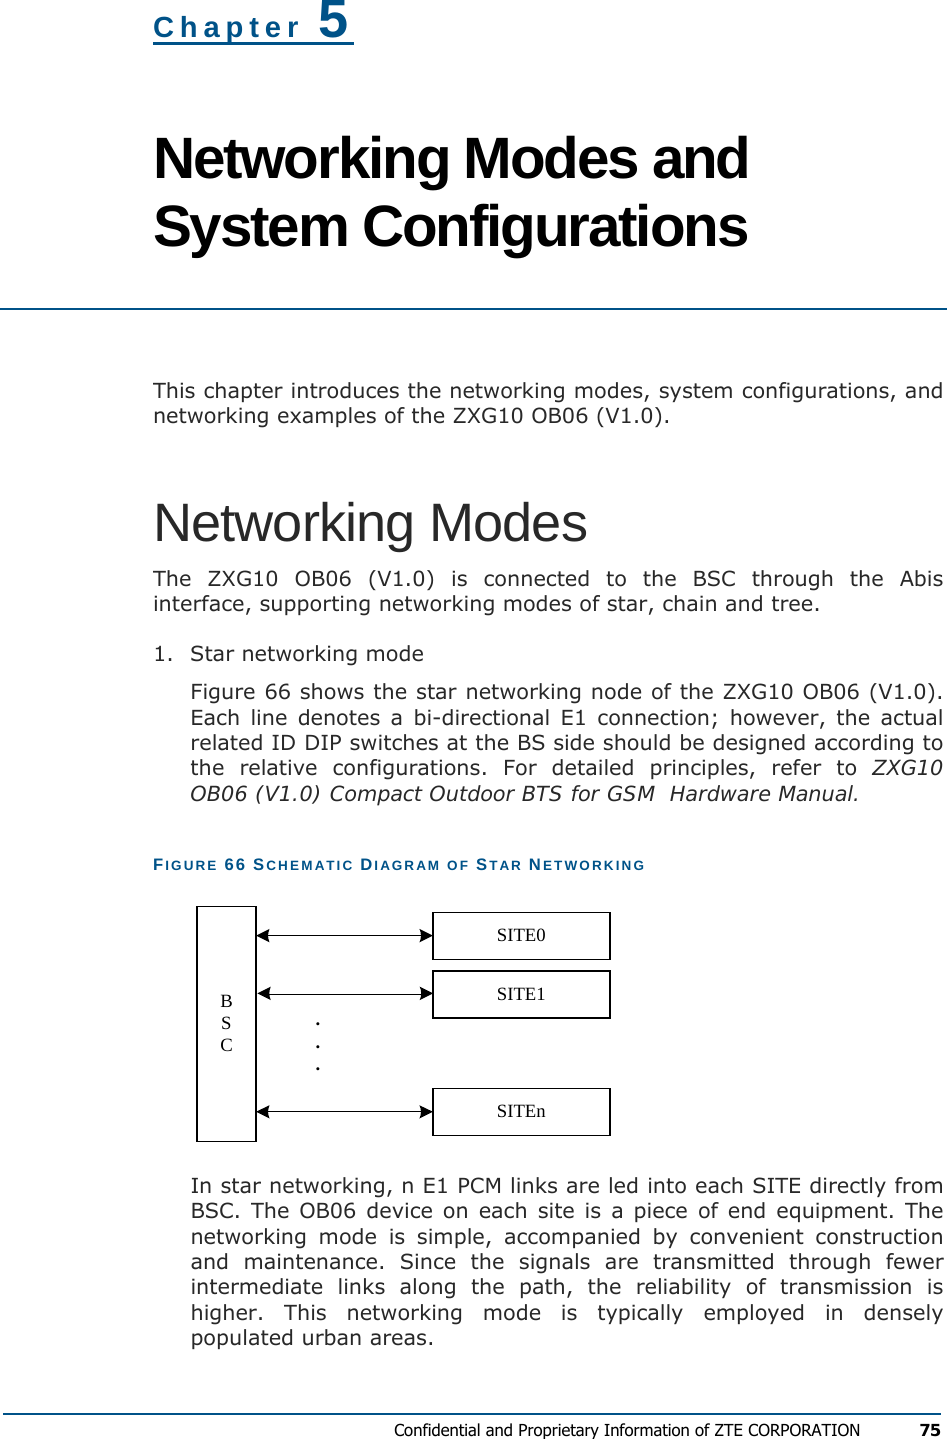  Confidential and Proprietary Information of ZTE CORPORATION 75  Chapter 5 Networking Modes and System Configurations  This chapter introduces the networking modes, system configurations, and networking examples of the ZXG10 OB06 (V1.0). Networking Modes The ZXG10 OB06 (V1.0) is connected to the BSC through the Abis interface, supporting networking modes of star, chain and tree. 1.  Star networking mode Figure 66 shows the star networking node of the ZXG10 OB06 (V1.0). Each line denotes a bi-directional E1 connection; however, the actual related ID DIP switches at the BS side should be designed according to the relative configurations. For detailed principles, refer to ZXG10 OB06 (V1.0) Compact Outdoor BTS for GSM  Hardware Manual. FIGURE 66 SCHEMATIC DIAGRAM OF STAR NETWORKING BSCSITE0SITE1SITEn... In star networking, n E1 PCM links are led into each SITE directly from BSC. The OB06 device on each site is a piece of end equipment. The networking mode is simple, accompanied by convenient construction and maintenance. Since the signals are transmitted through fewer intermediate links along the path, the reliability of transmission is higher. This networking mode is typically employed in densely populated urban areas. 